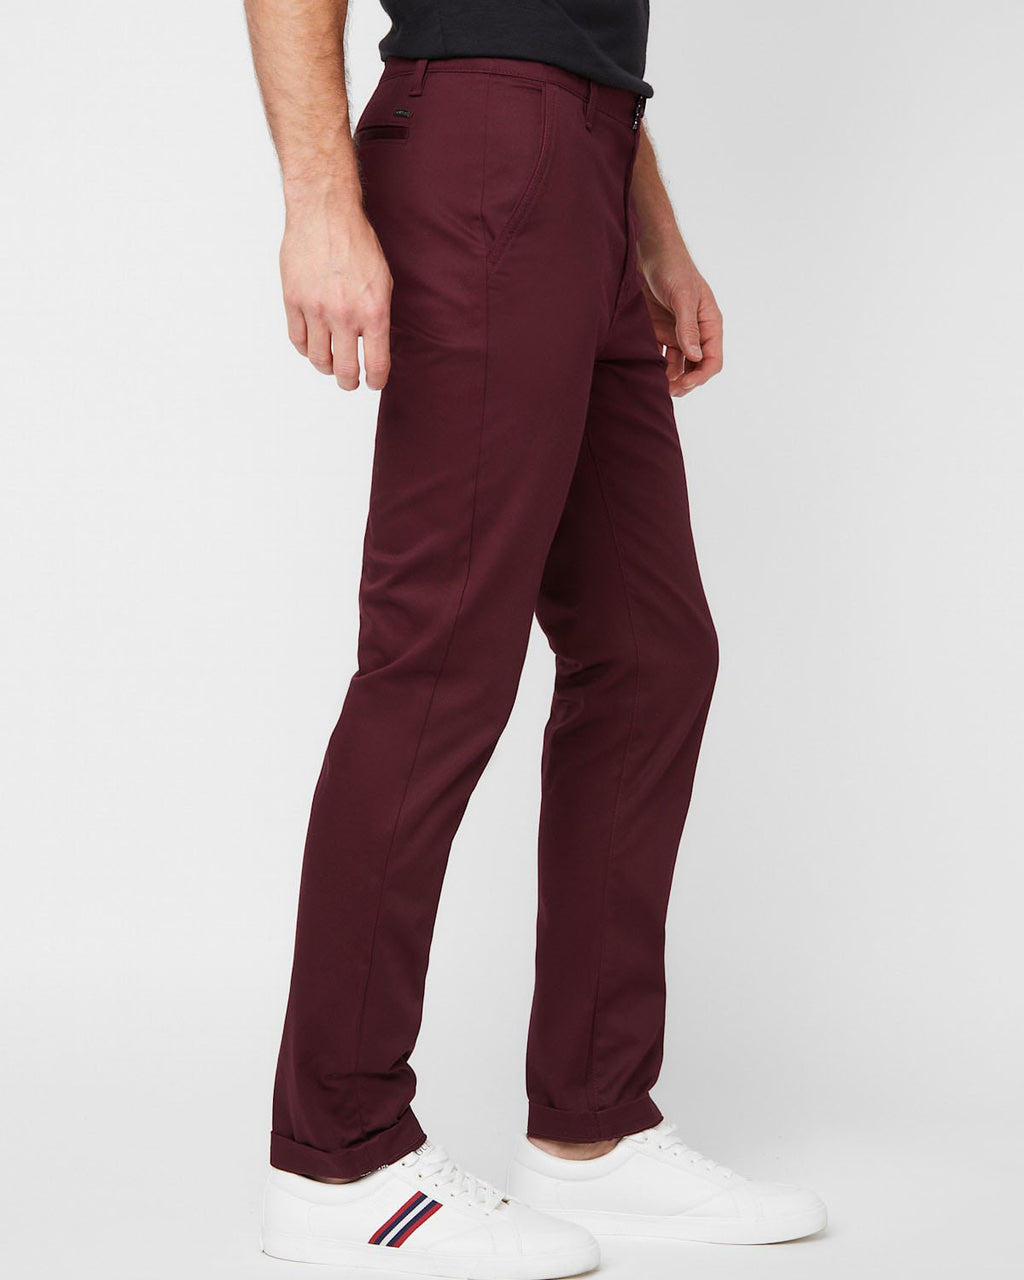 Guess Silvestre Sateen Pants Marmont red